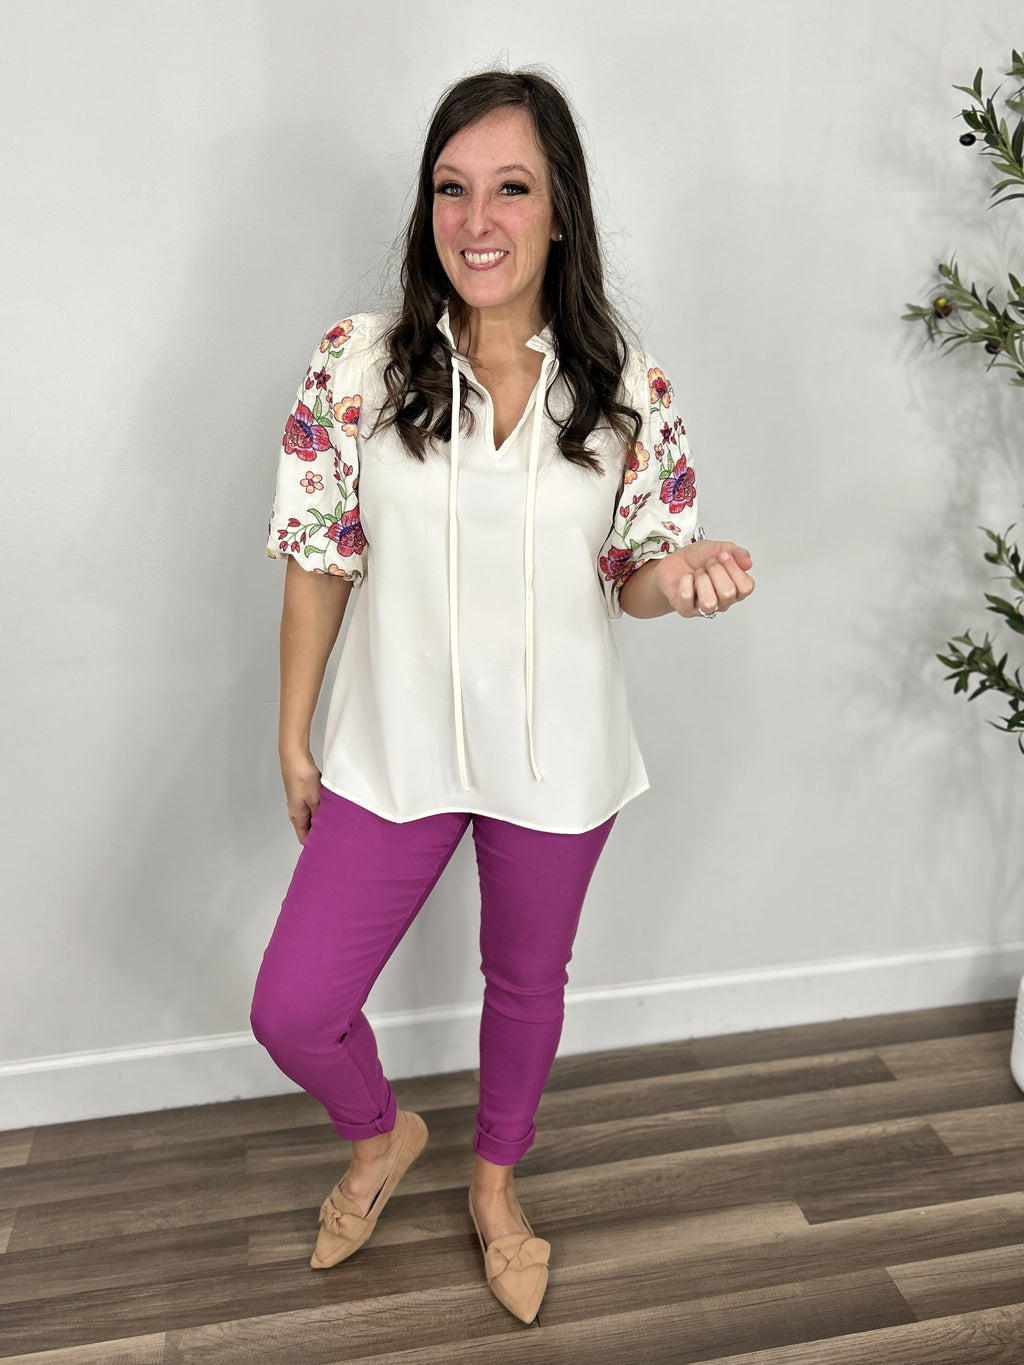 Savannah Floral Puff Sleeve Top paired with the berry color Fletcher Skinny Jeans.